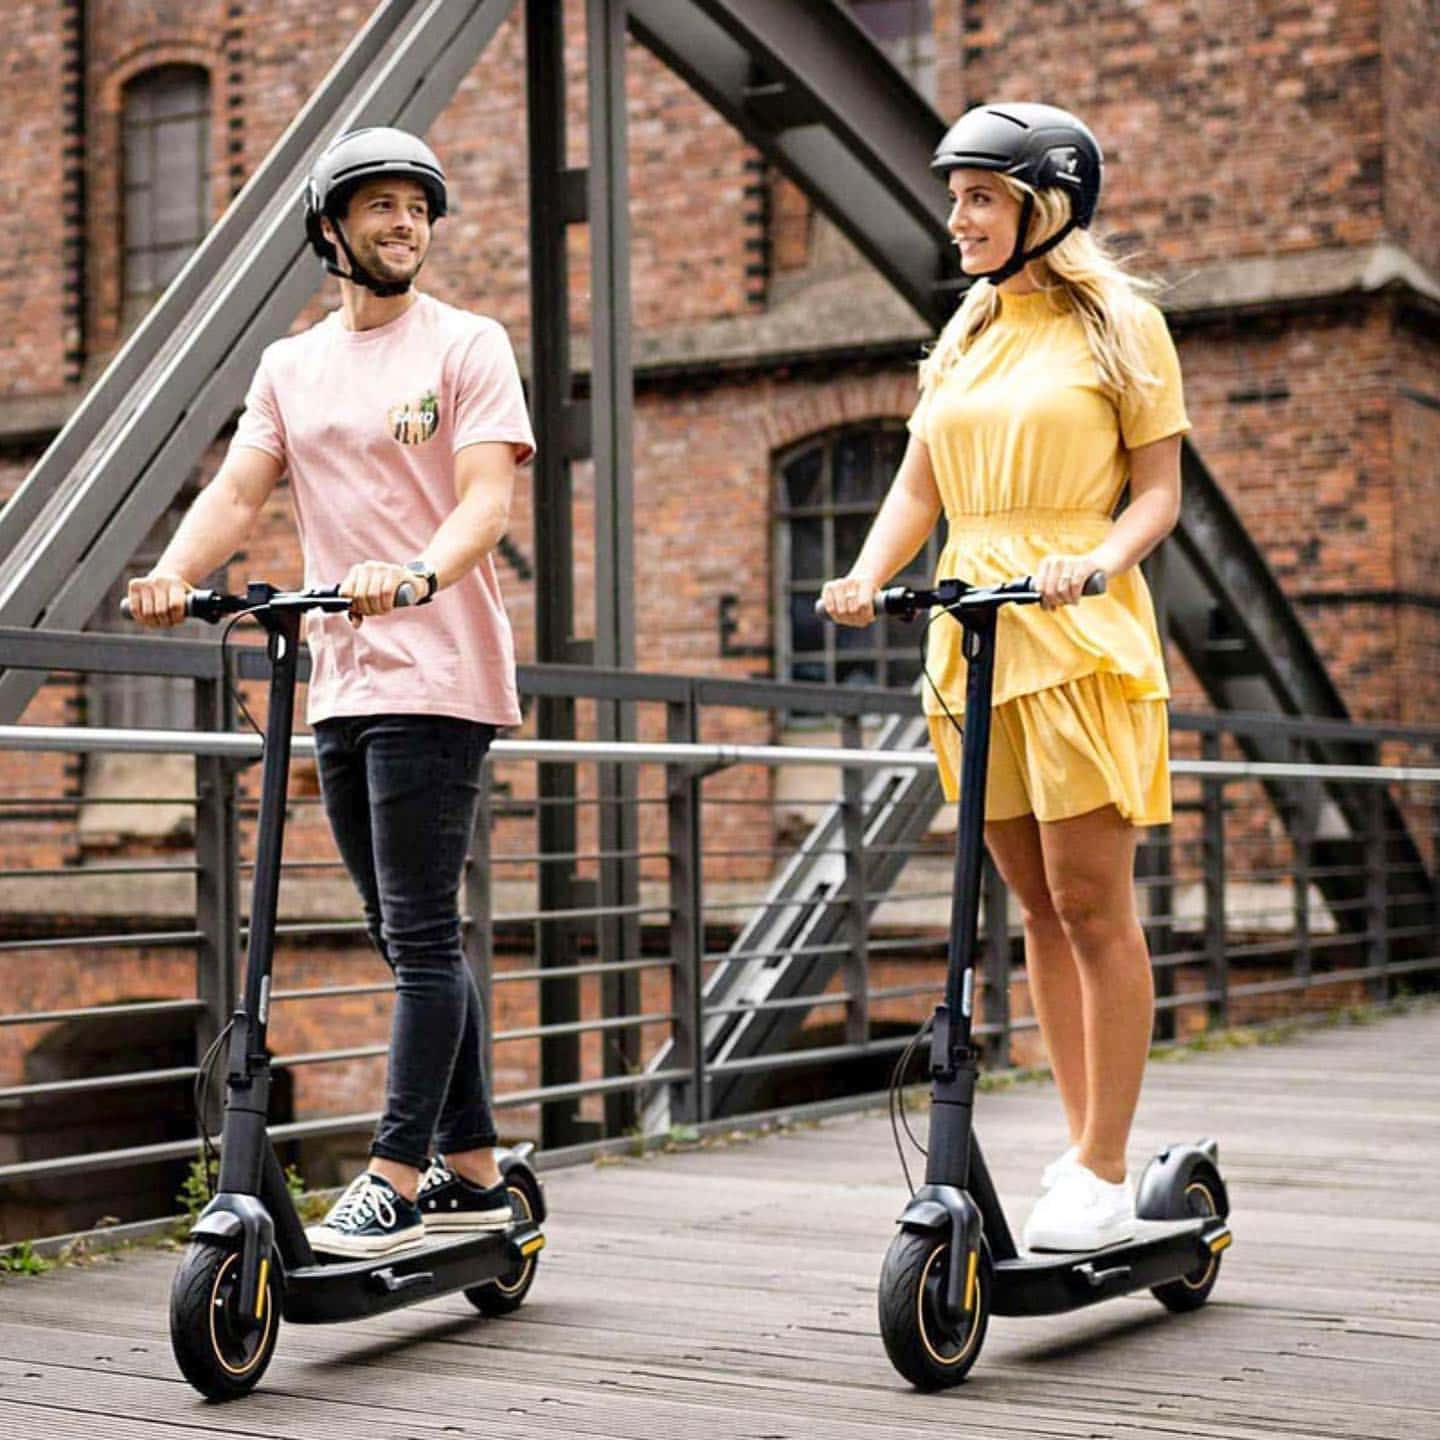 🛴GIVEAWAY! Ready, set, go! Join the urban mobility revolution with Segway Max. This award-winning electric scooter by Segway-Ninebot has everything you need for your daily commute. Wellbots is offering one lucky reader the chance to win their very own!
How to Enter:

1 winner will receive a Segway Ninebot KickScooter MAX RV $800 from #Wellbots.

🛴 Must like and save this post.

🛴 Must follow all accounts, and your account must be public:
@wellbots
@thereviewwire
@mrsdchastain
@goodvibesotg
@momskoop
@prettylovedblog
@SavingYouDinero
@crazy_for_couponing
@LauraOinAK
@gingercasa
@RoamingMyPlanet

🛴 BONUS: Tag a friend and add #SoChicHoliday

Can’t wait? Visit Wellbots https://bit.ly/WellbotsSmartProducts and use code BF10 to get 10% OFF non-sale items. (#sponsor). Giveaway closes on 11/27/22 at 11:59 p.m. EST. One Winner will be randomly selected and contacted via DM by 11/30/22.

No purchase necessary. Must be 18 years or older to enter. Open to U.S. residents of the 48 contiguous United States. Your Instagram account must be public to enter. This promotion is in no way sponsored, endorsed, administered by, or associated with, Instagram.

#giftideas #scooterlife #segwayfun #giftguide